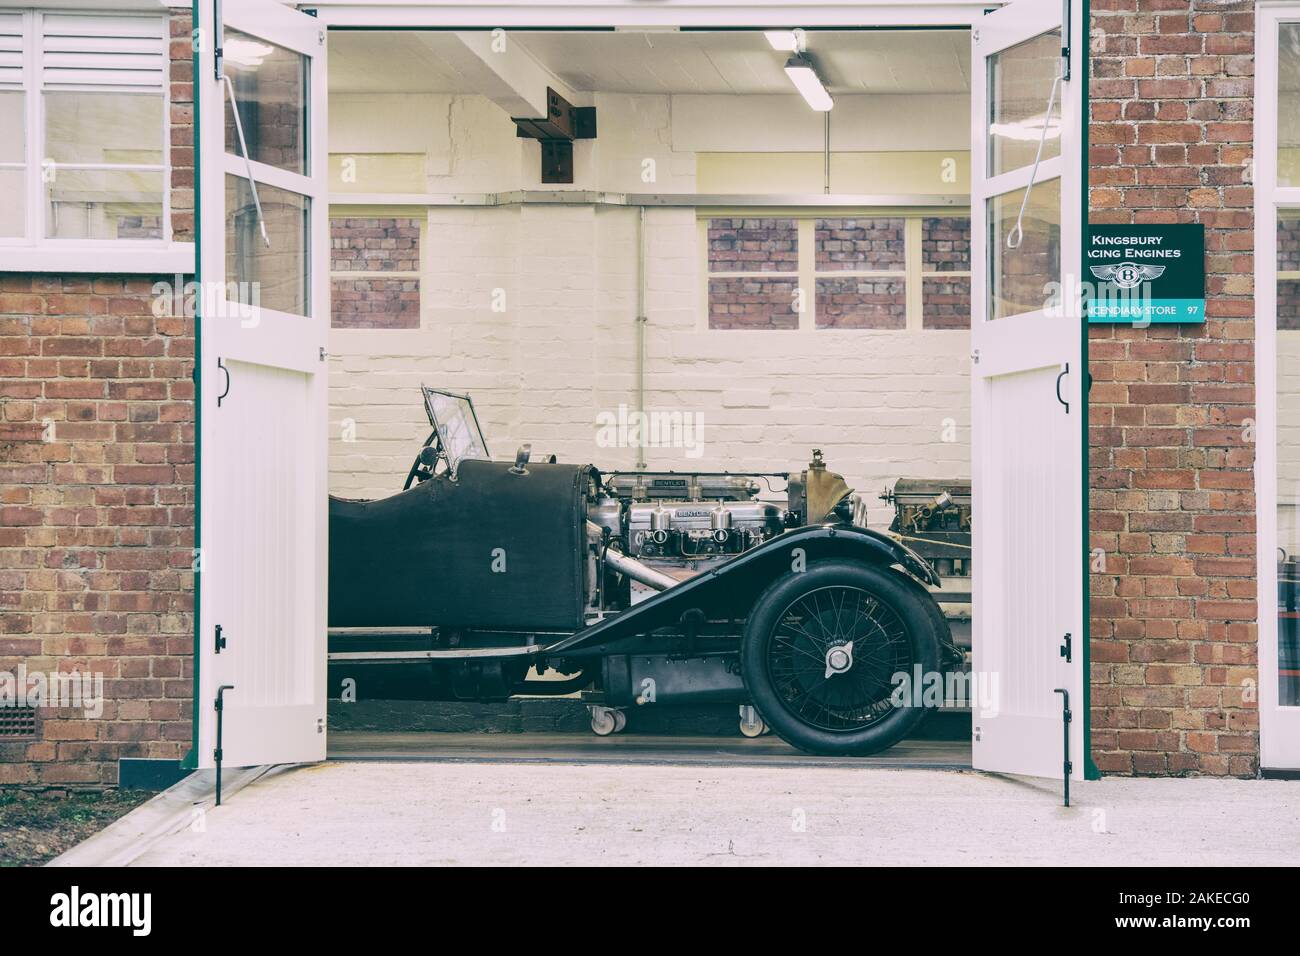 1924 Bentley 3 Liter Speed Model in a workshop at Bicester Heritage Centre Sunday scramble event. Oxfordshire, England. Vintage filter applied Stock Photo